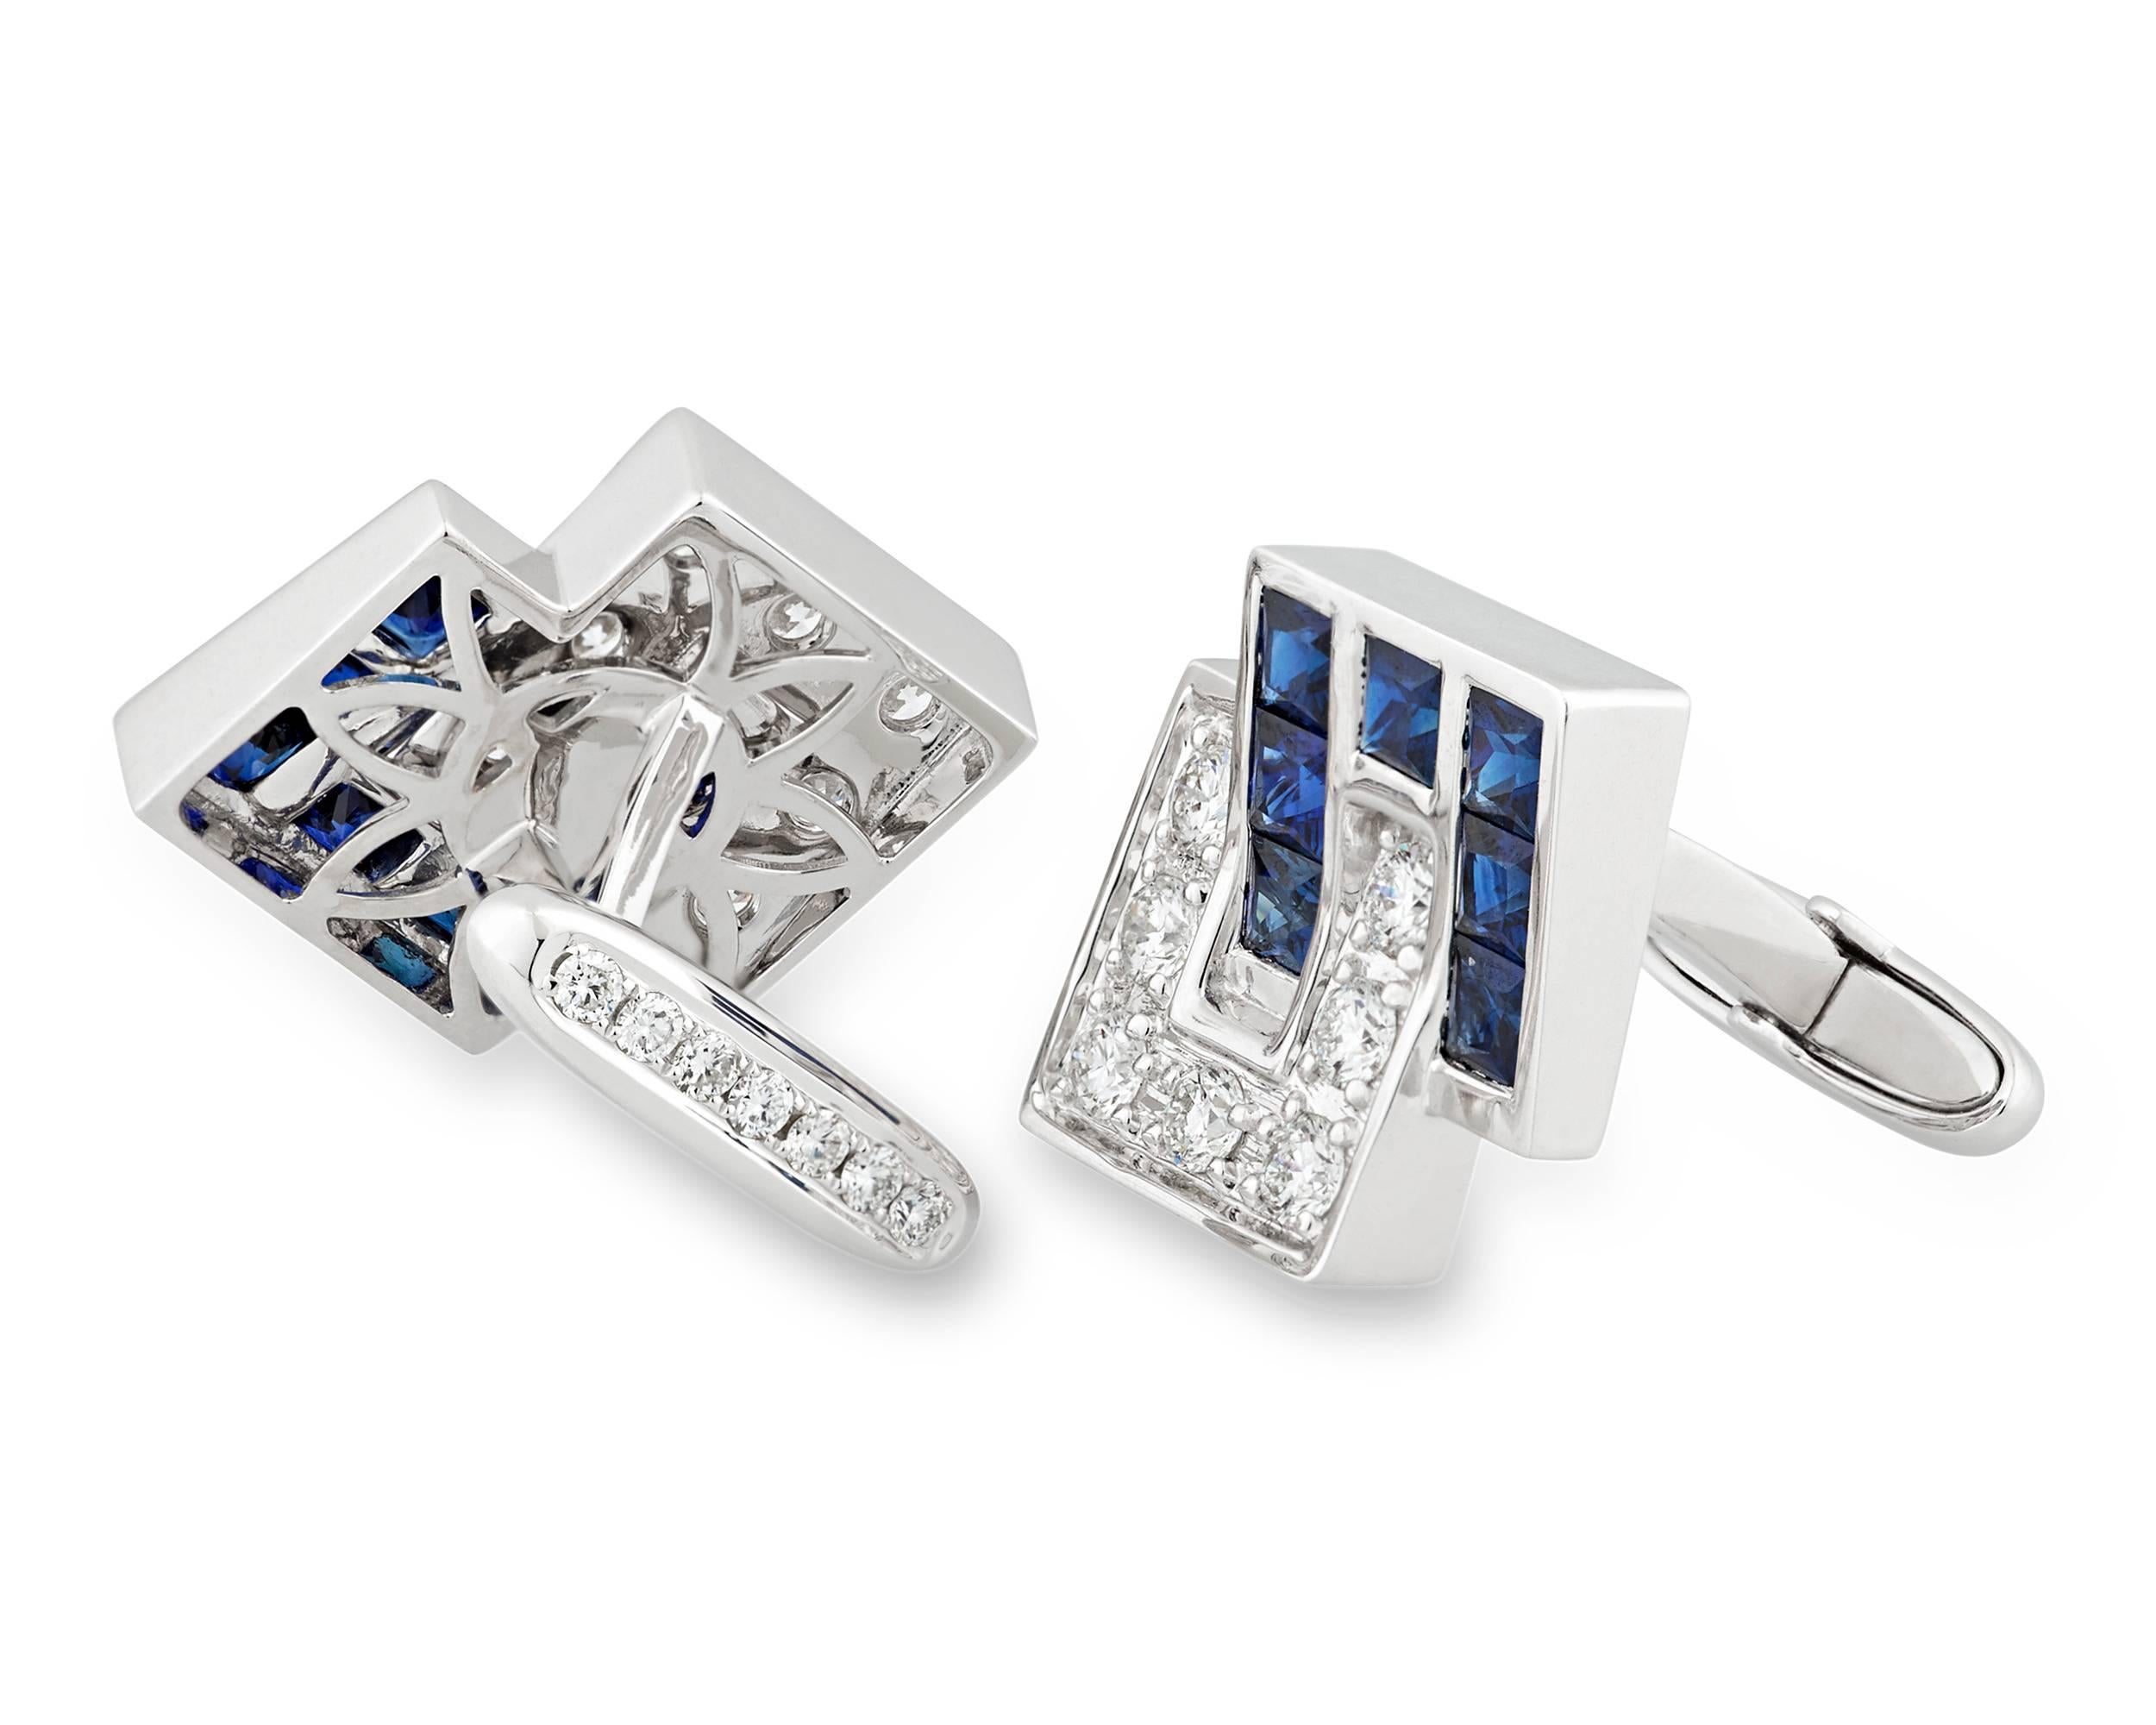 Boasting a bold, linear design, these handsome cufflinks are embedded with 14 sapphires totaling 5.36 carats and 28 round white diamonds totaling 2.49 carats, all channel-set in 18k white gold. A bar connector holds the cufflinks firmly in place,